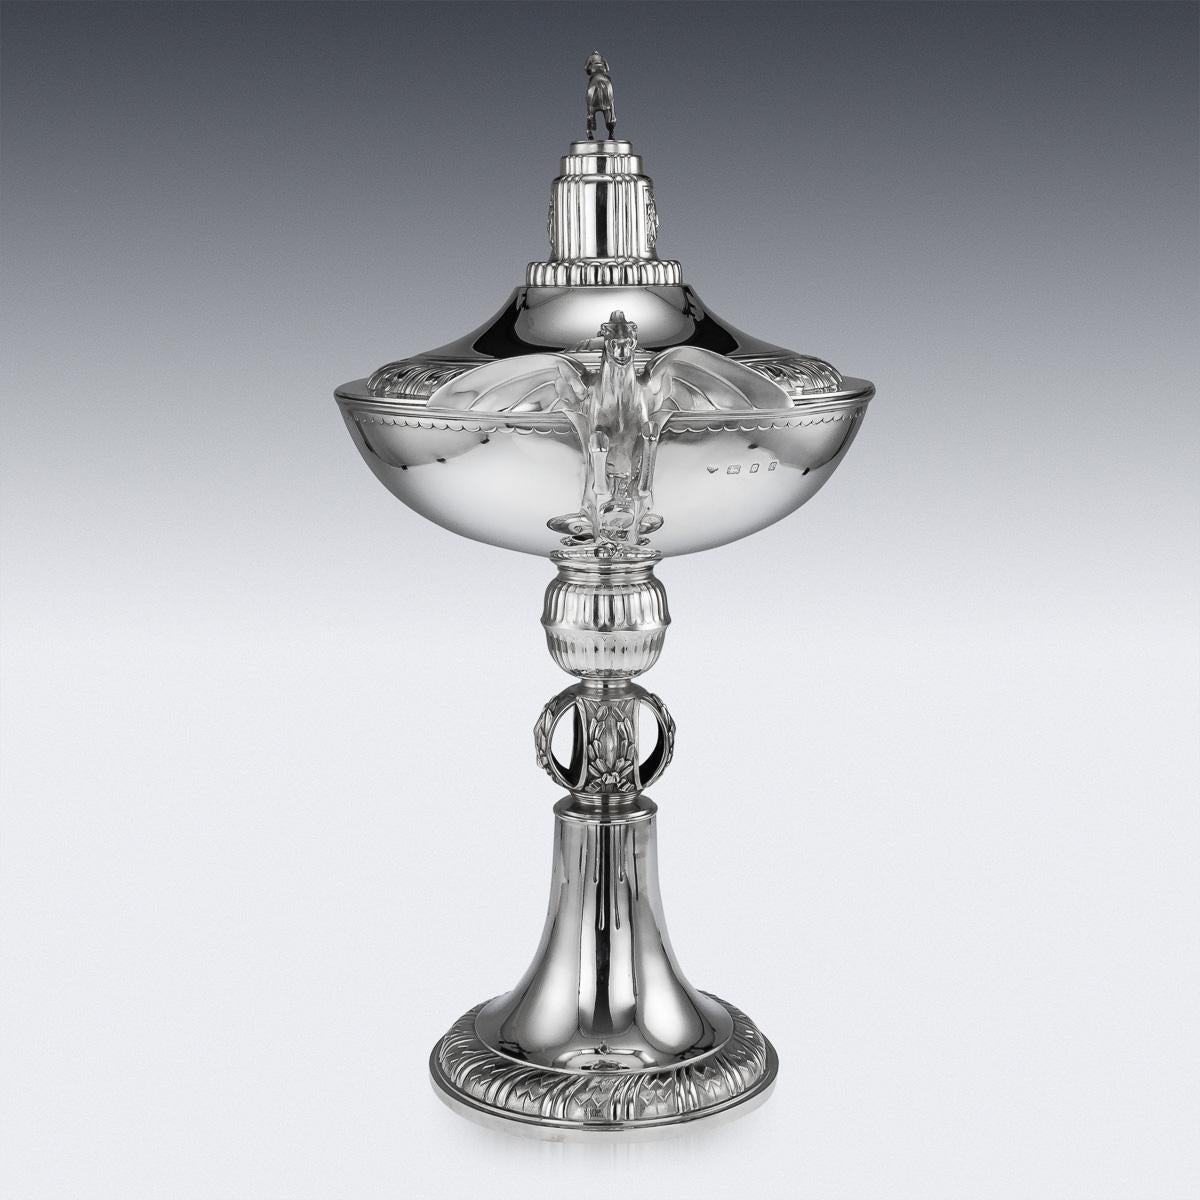 Antique 20th century English Art Deco solid silver monumental trophy cup and cover, shaped as a cocktail glass, the lid, stem and base decorated with stylized laurel leaves, sides applied with beautifully modelled twin cast Pegasus handles, the lid